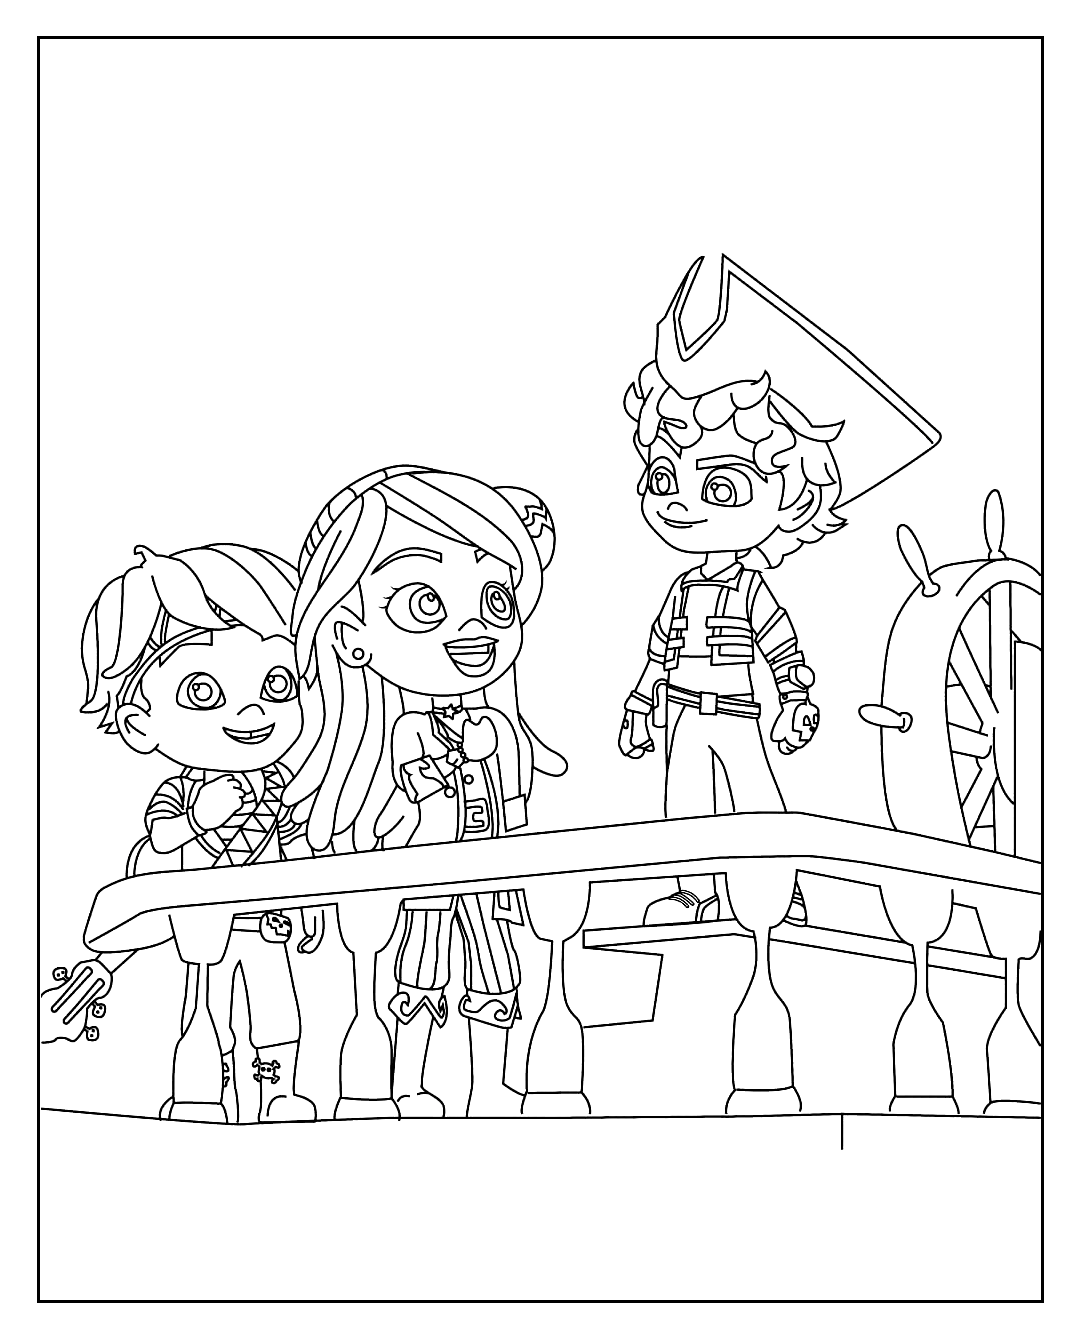 Santiago and Friends Coloring Page